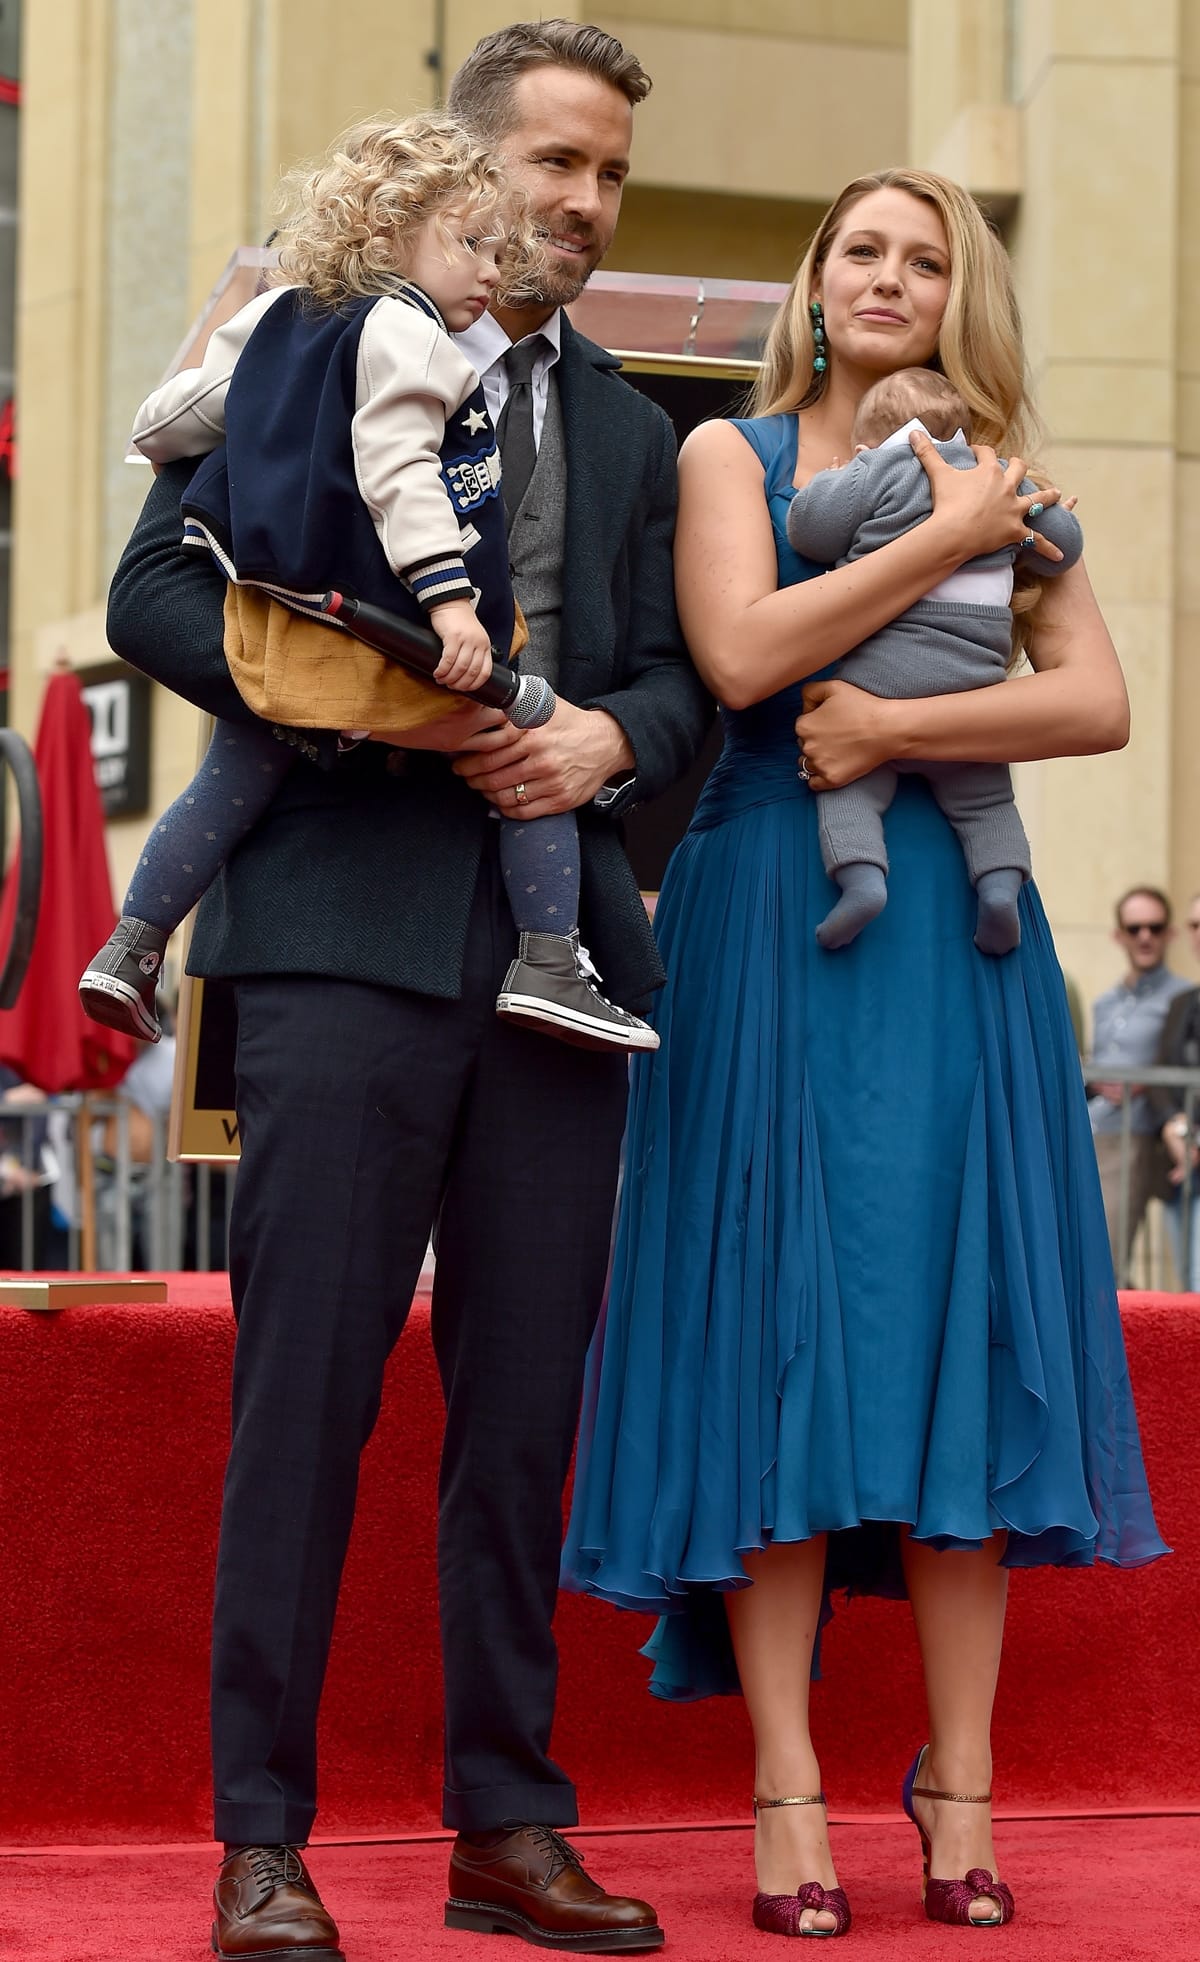 Ryan Reynolds and Blake Lively, with daughters James Reynolds and Ines Reynolds, attend the ceremony honoring Ryan Reynolds with a Star on the Hollywood Walk of Fame